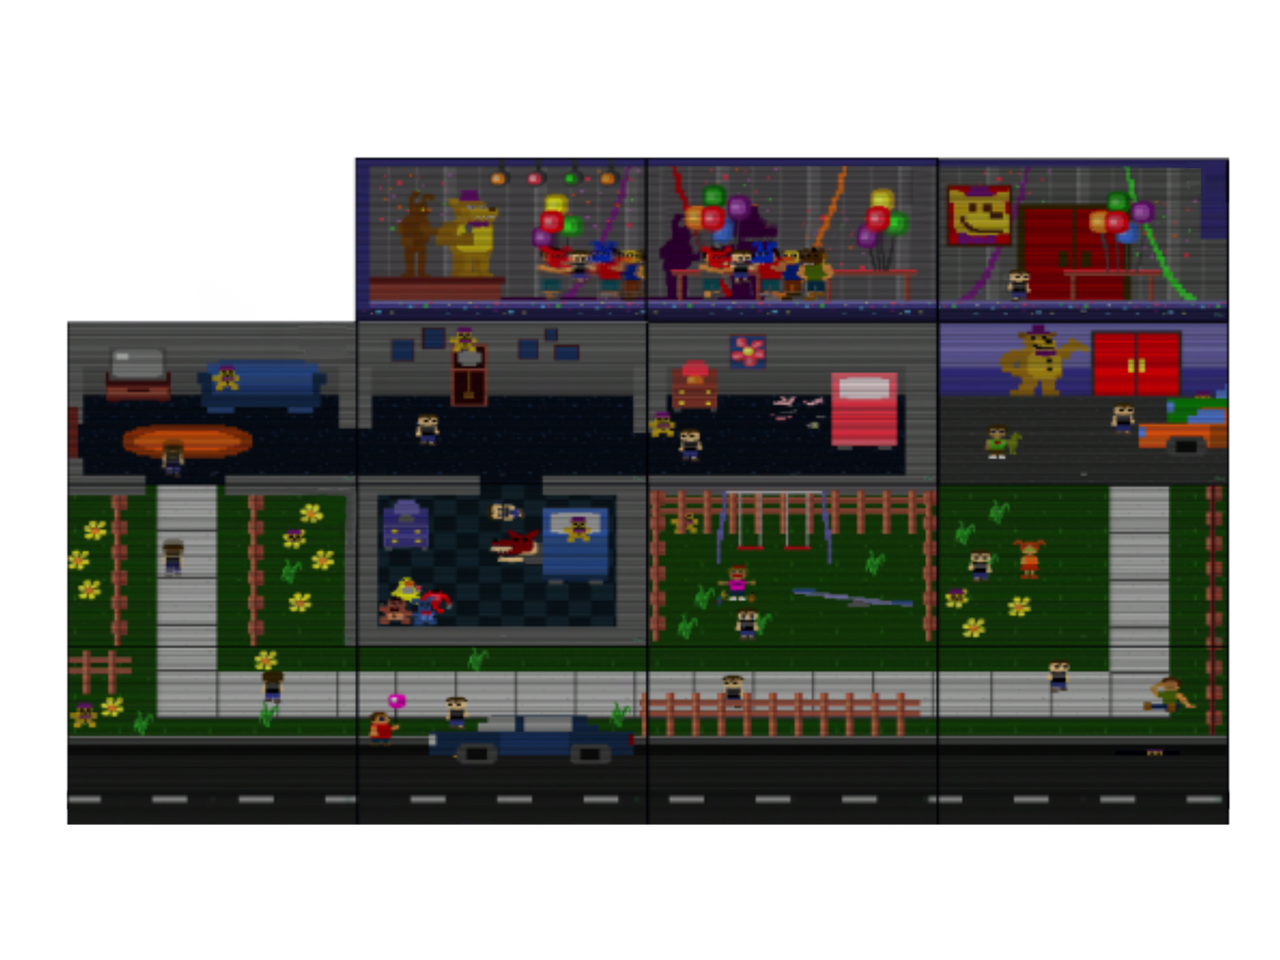 Fnaf 4 Minigame Map(Edit) by bearbro123 on DeviantArt